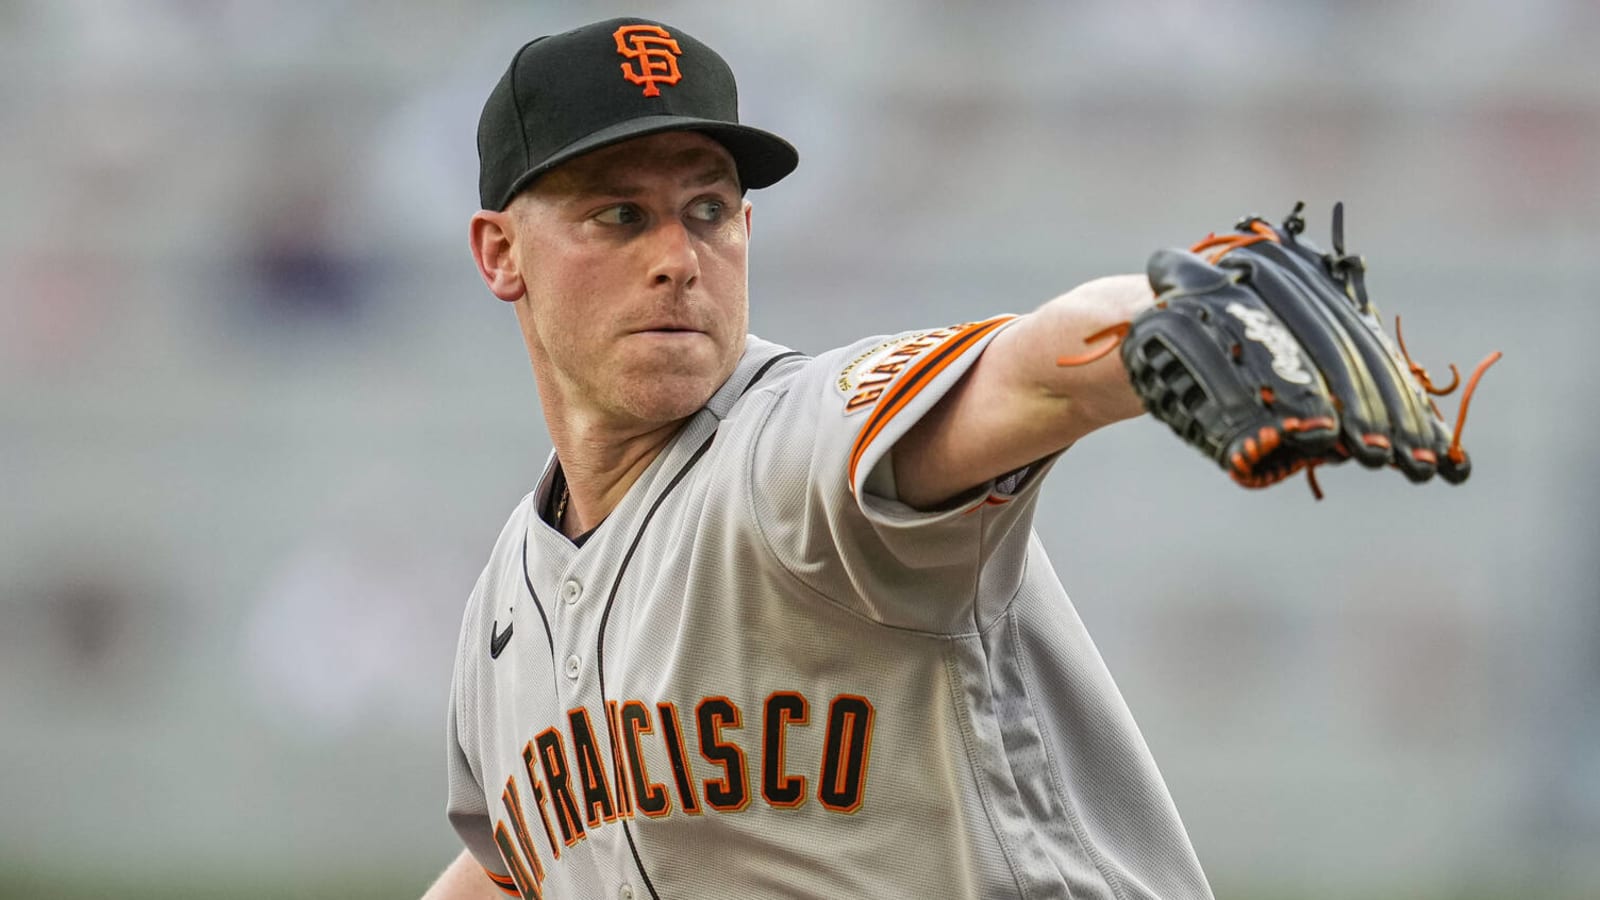 Giants SP Anthony DeSclafani to have ankle surgery, likely out for season